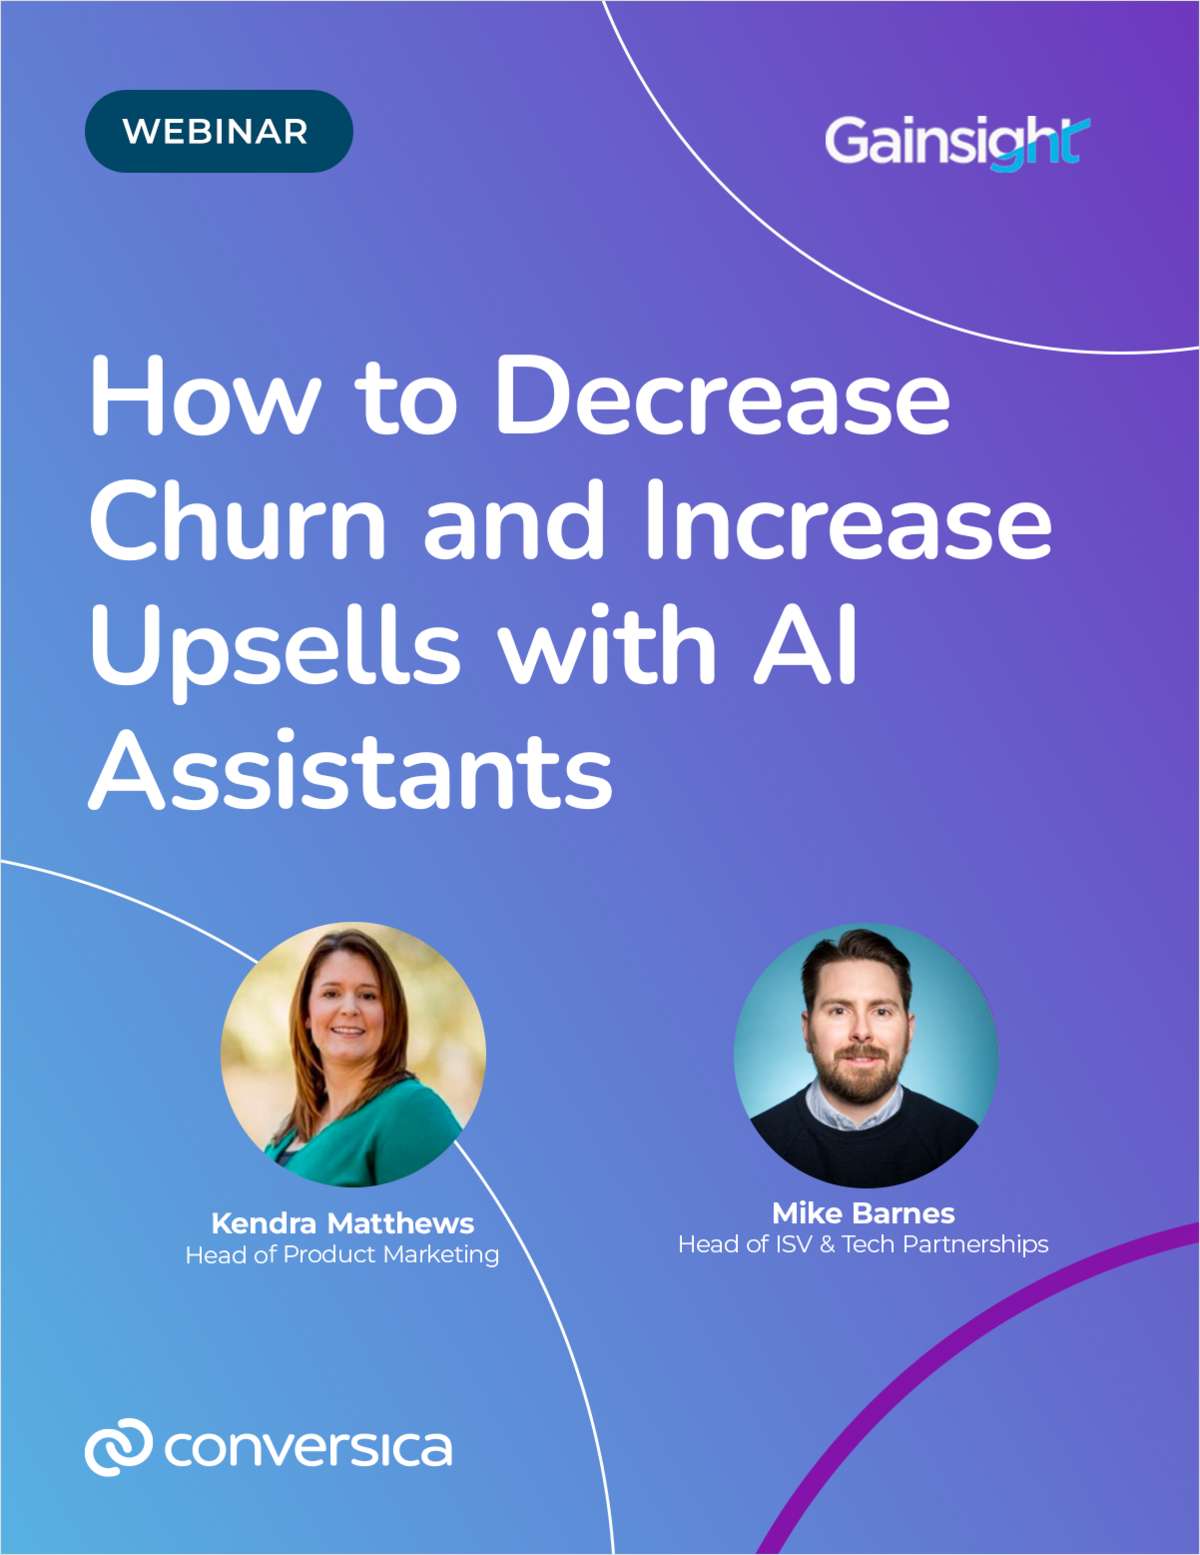 How to Decrease Churn and Increase Upsells with AI Assistants